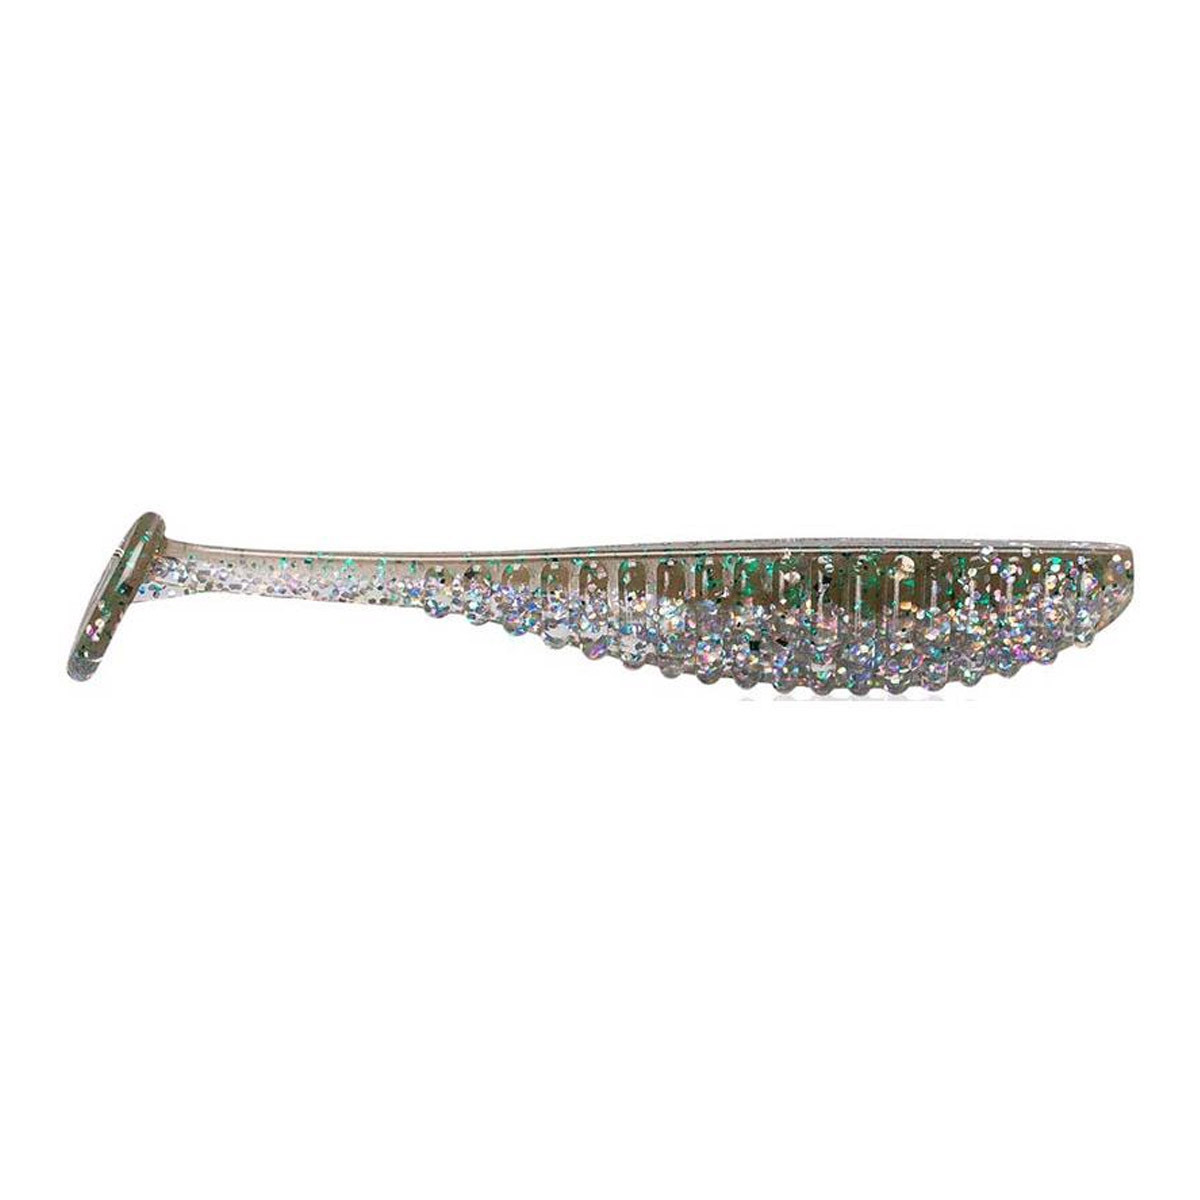 Reins S-Cape Shad 3.5 Inch